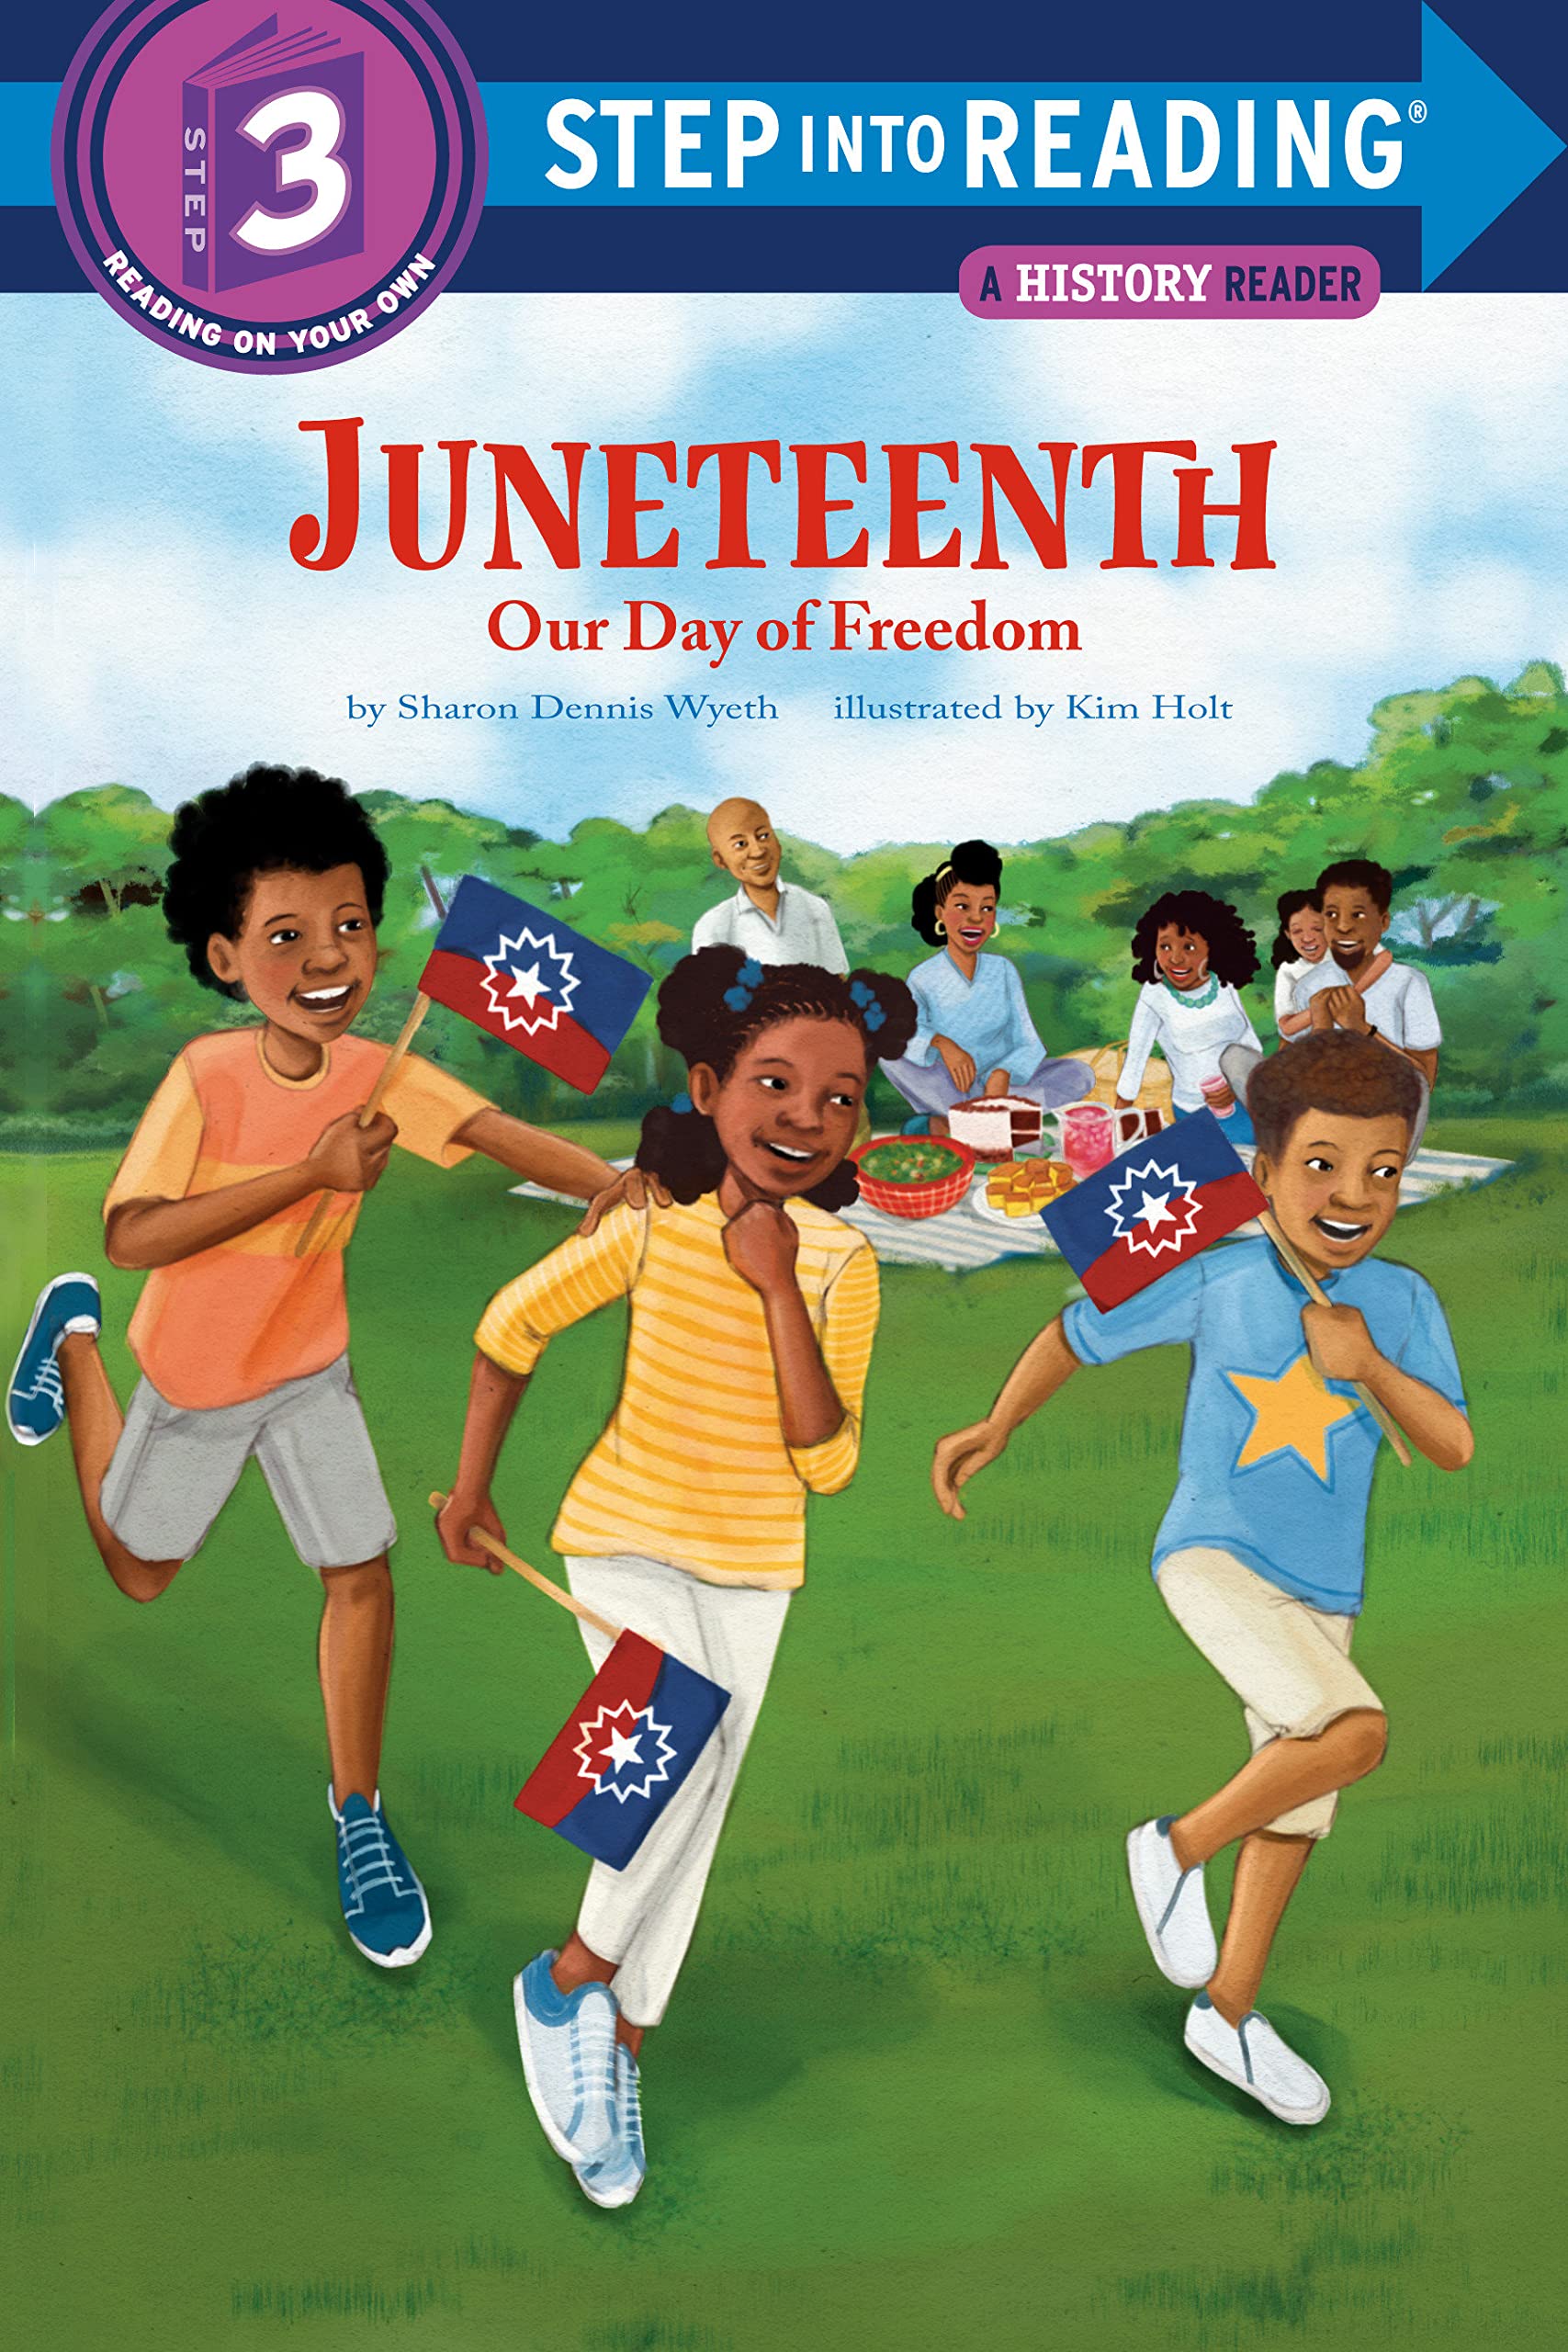 Image for "Juneteenth: Our Day of Freedom"